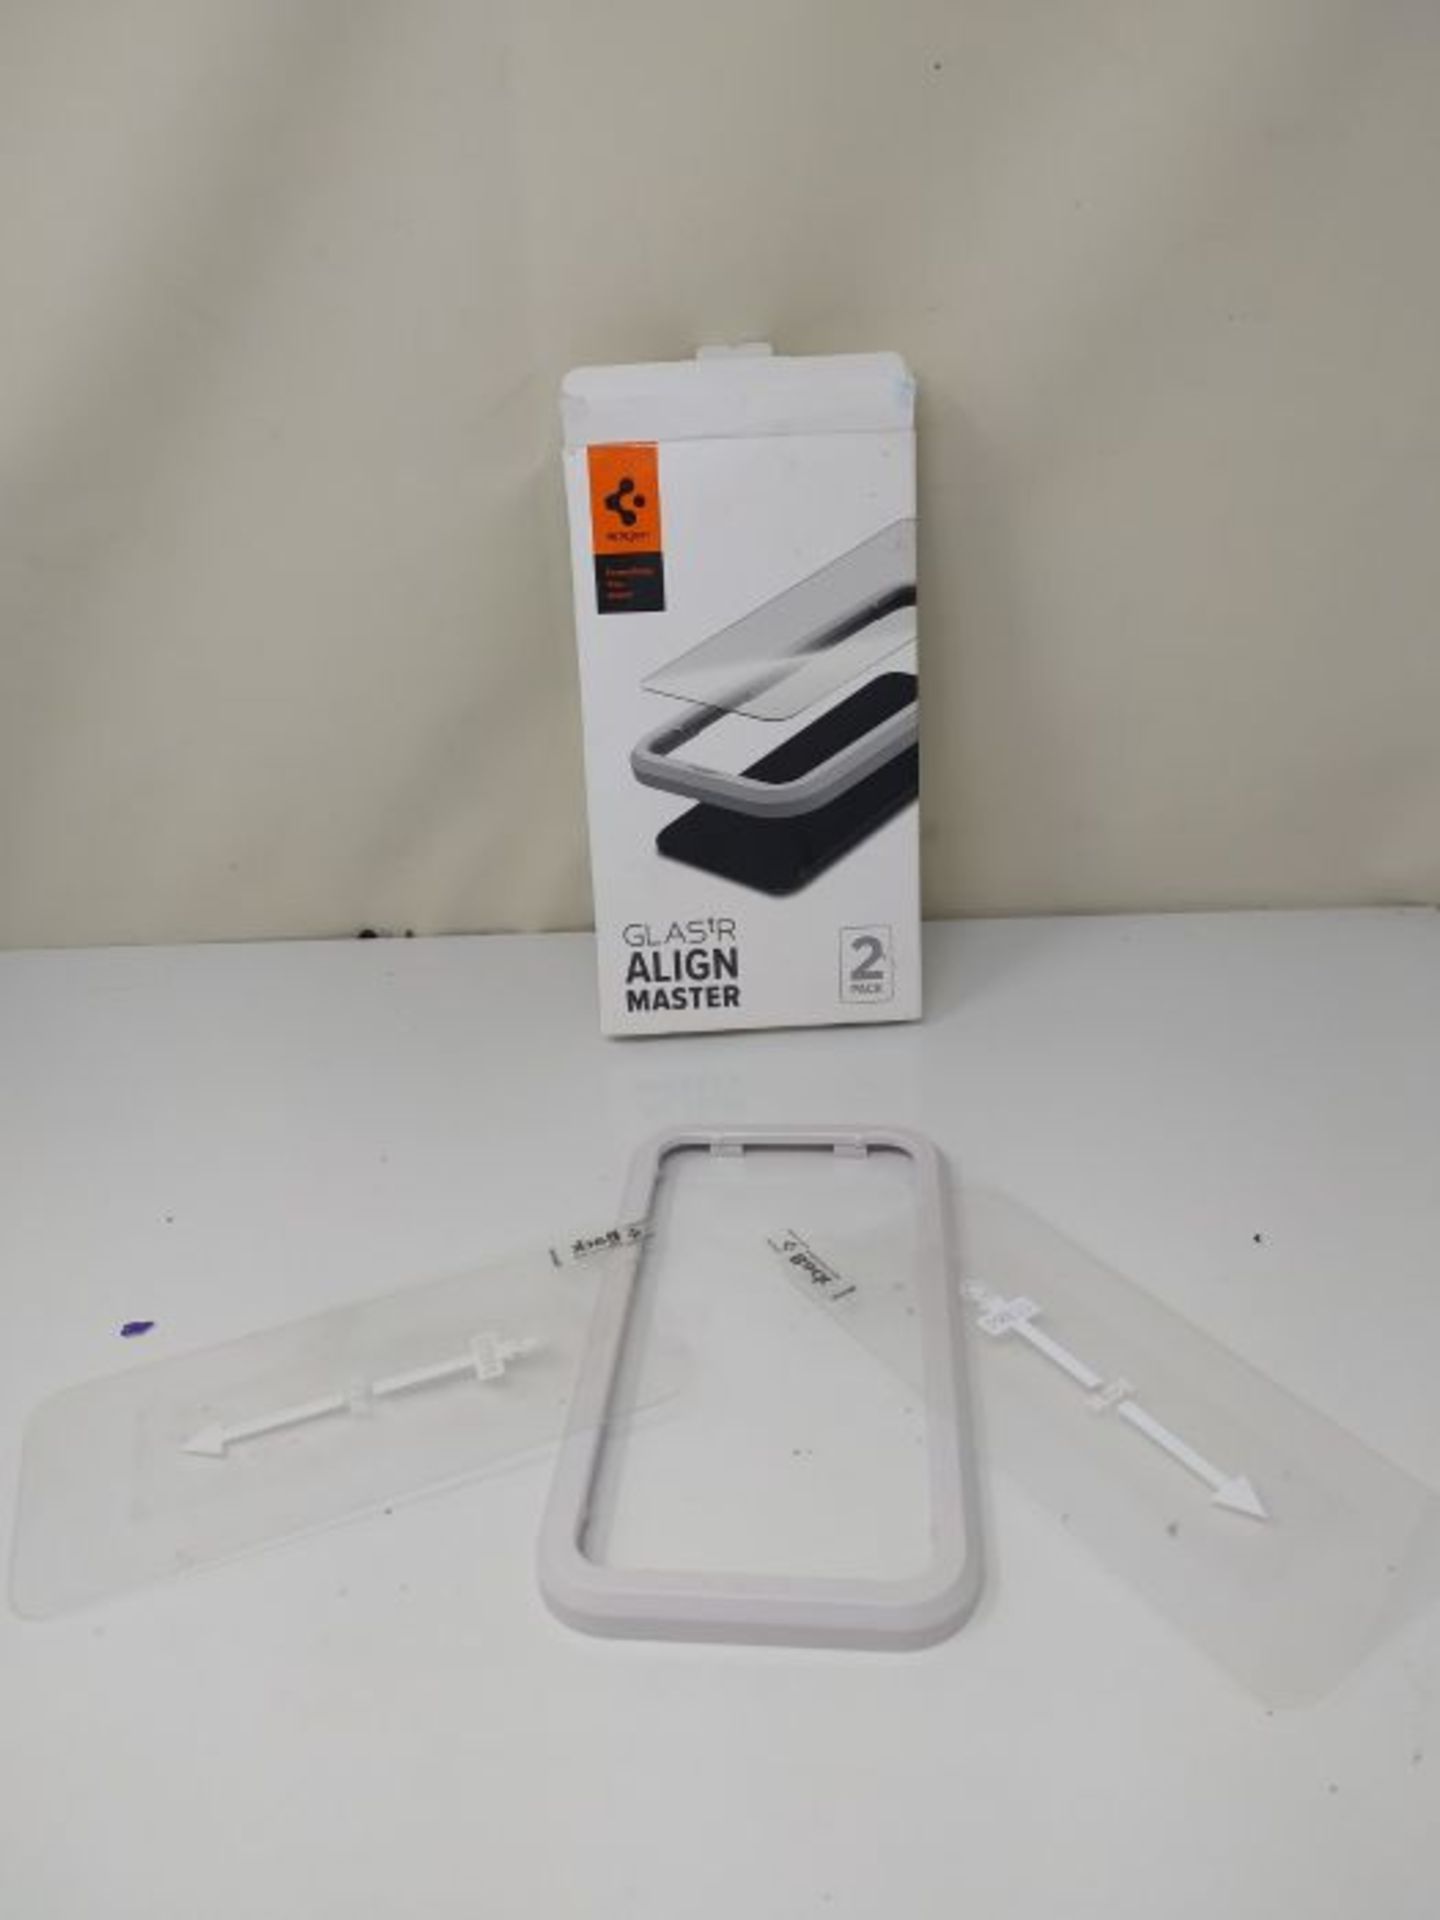 Spigen AlignMaster Tempered Glass Screen Protector for iPhone 12 and for iPhone 12 Pro - Image 2 of 2